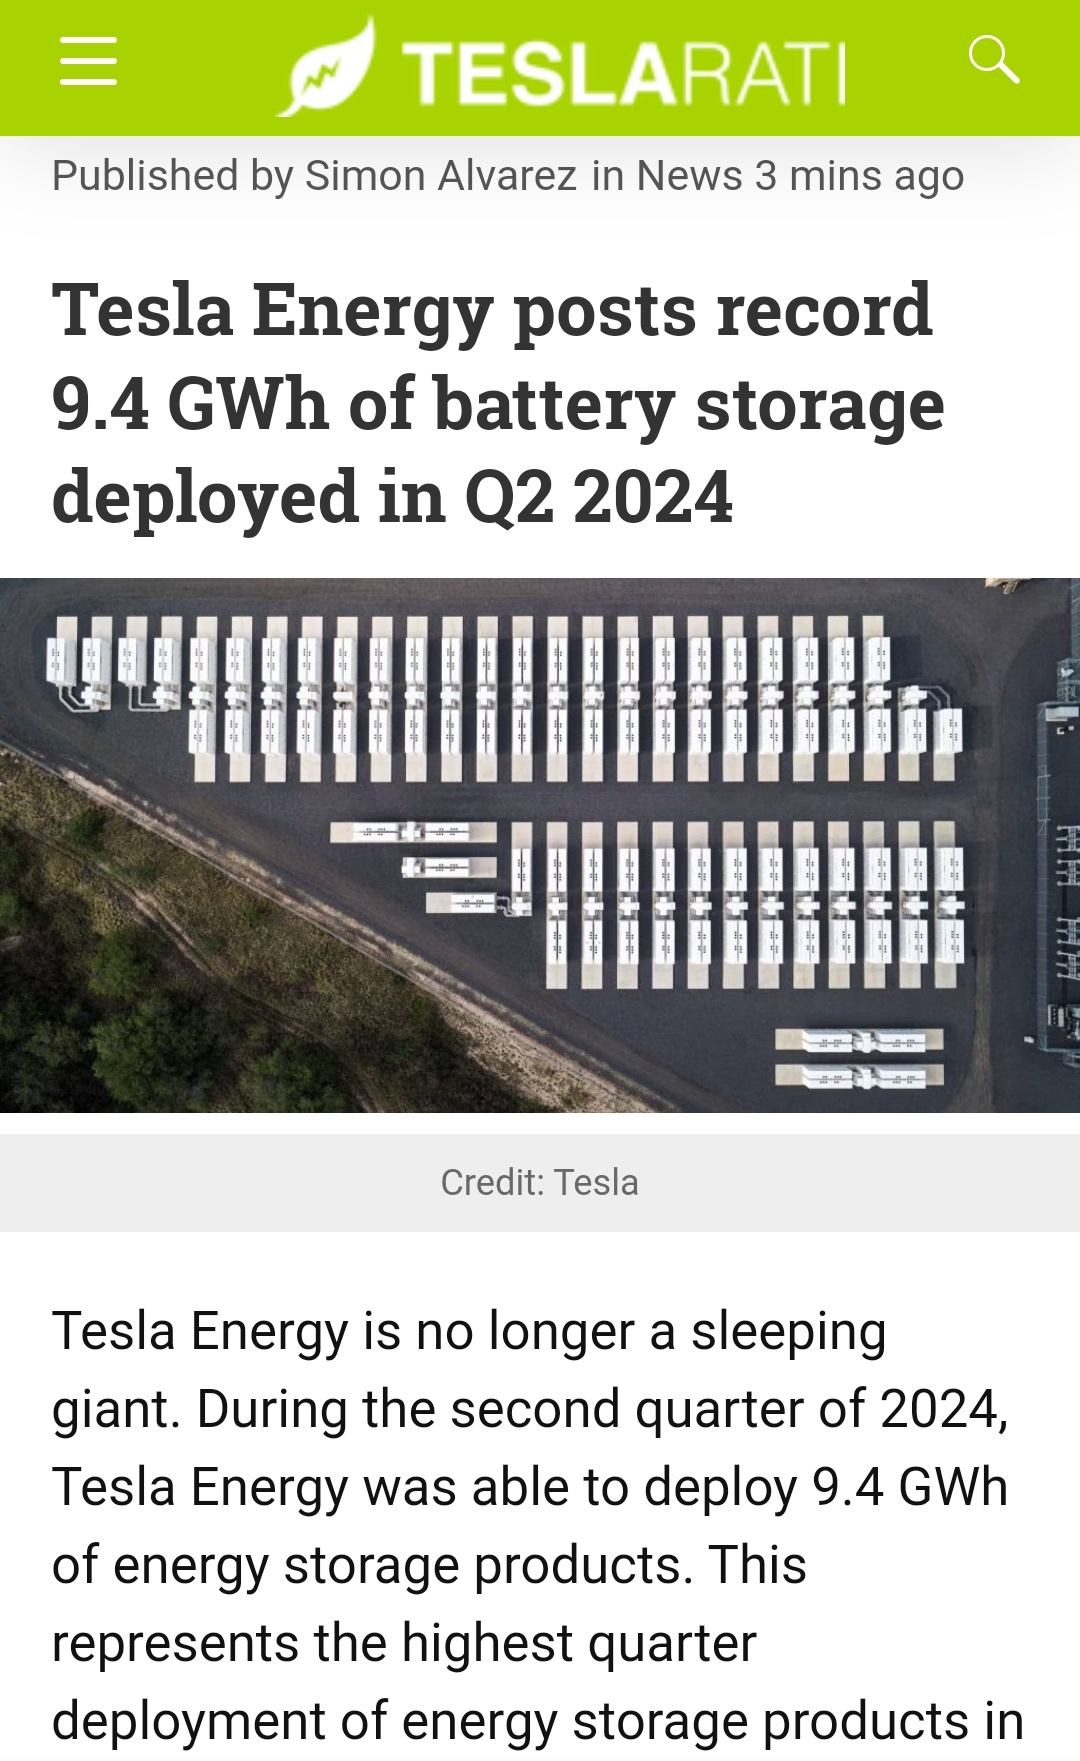 Tesla Energy posts record 9.4 GWh battery storage deployed in Q2 2024